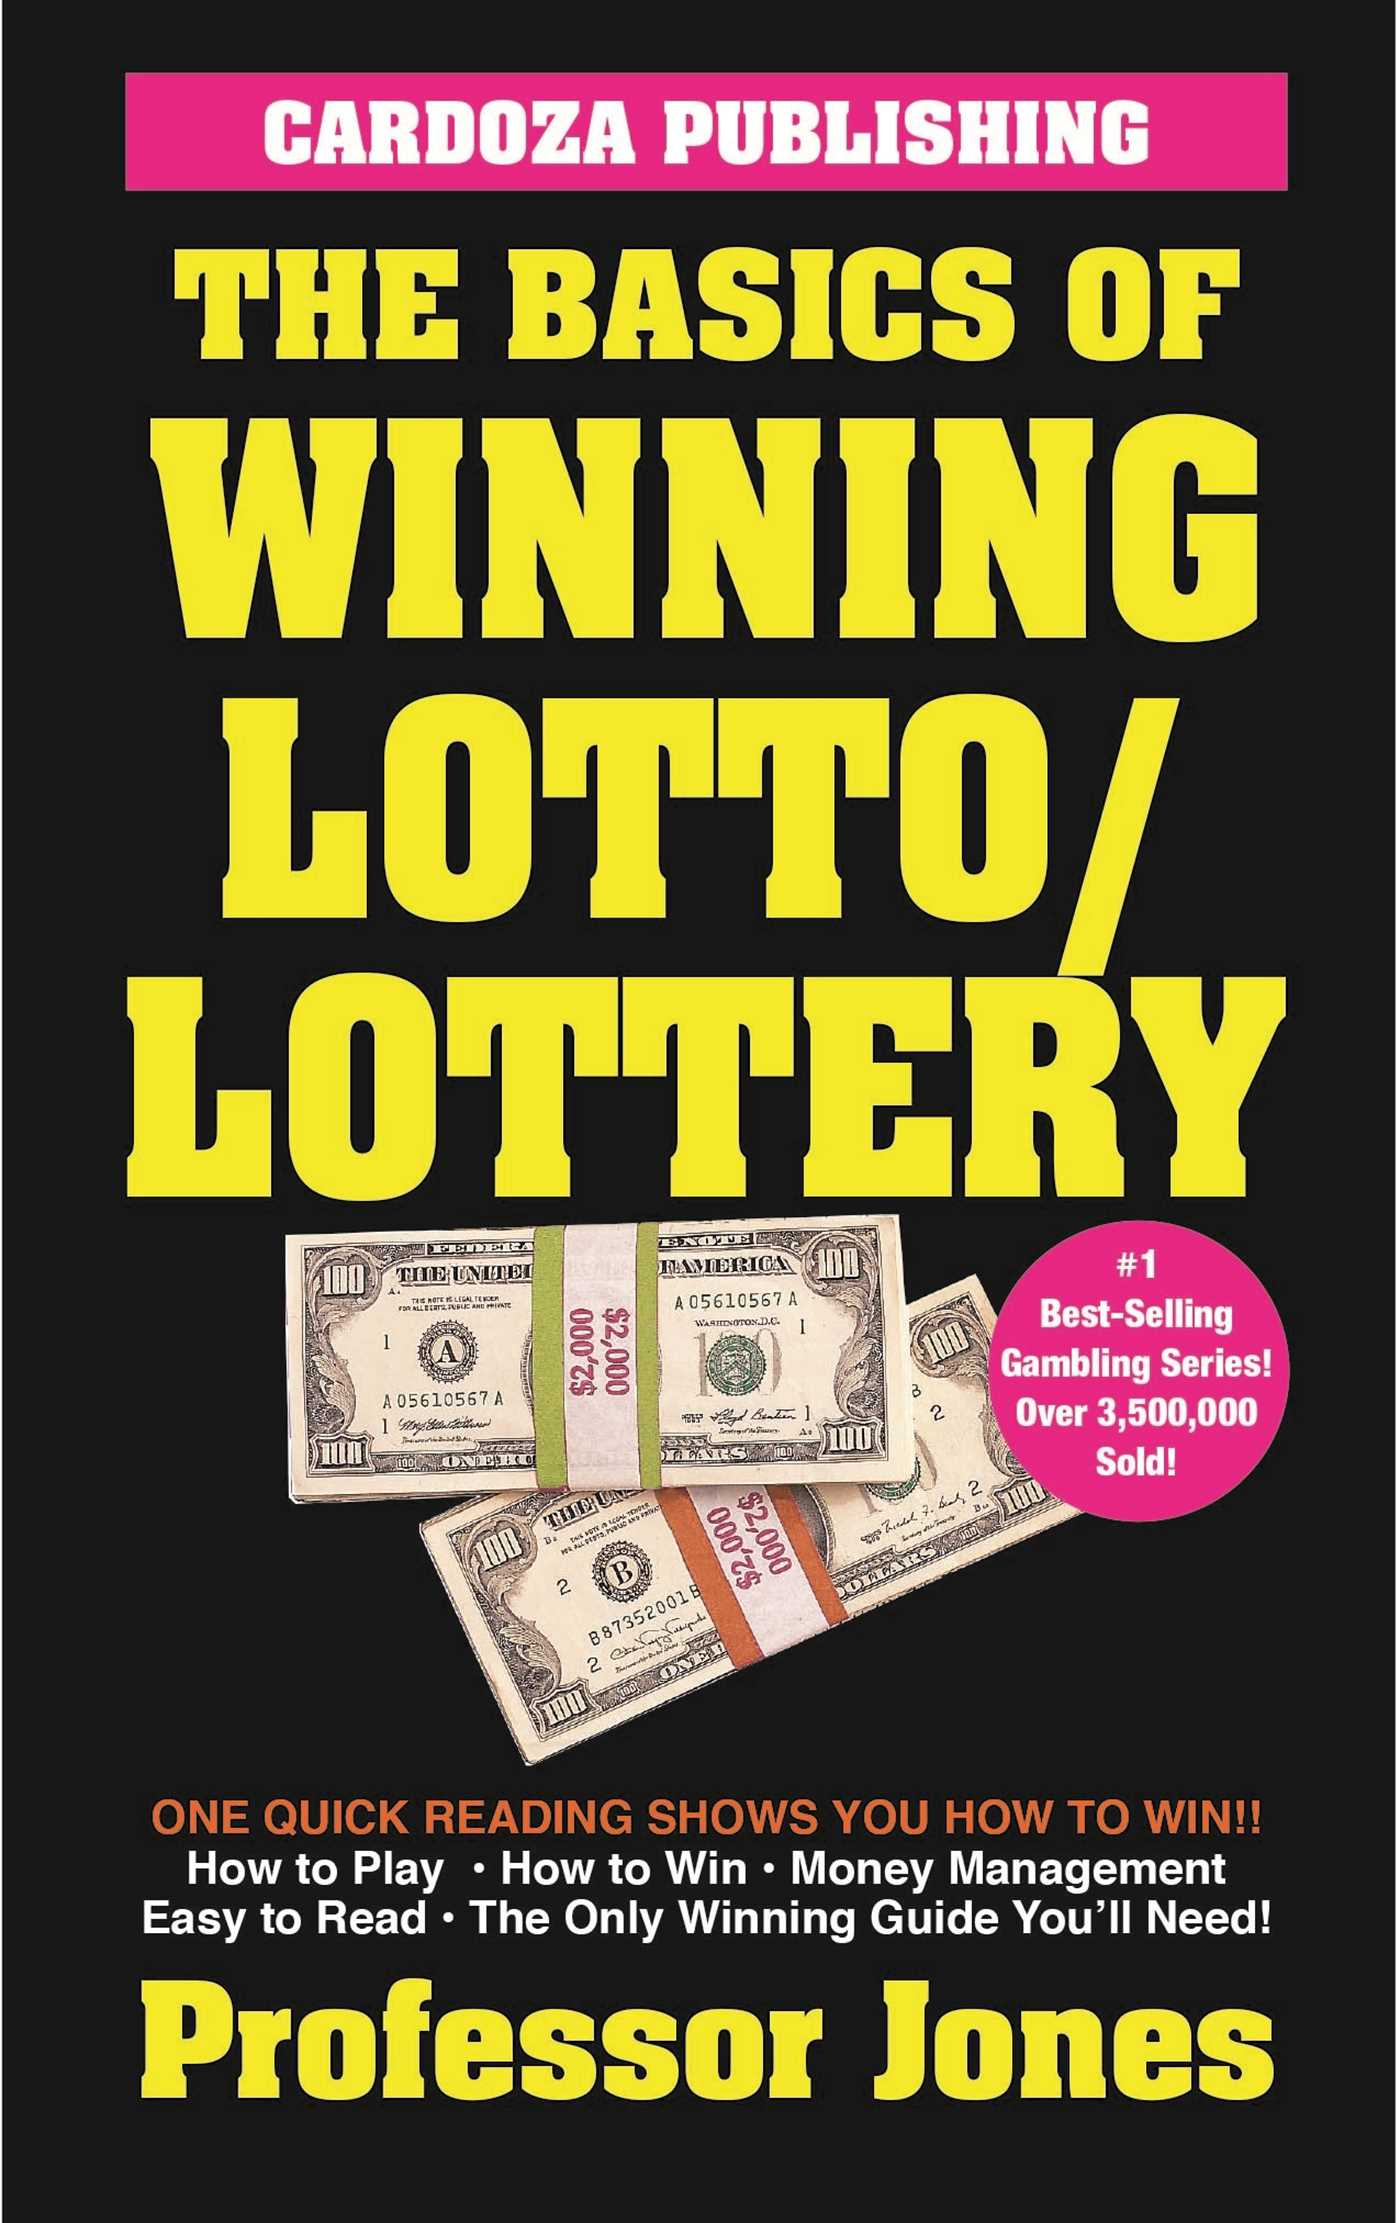 Book on how to win the lottery